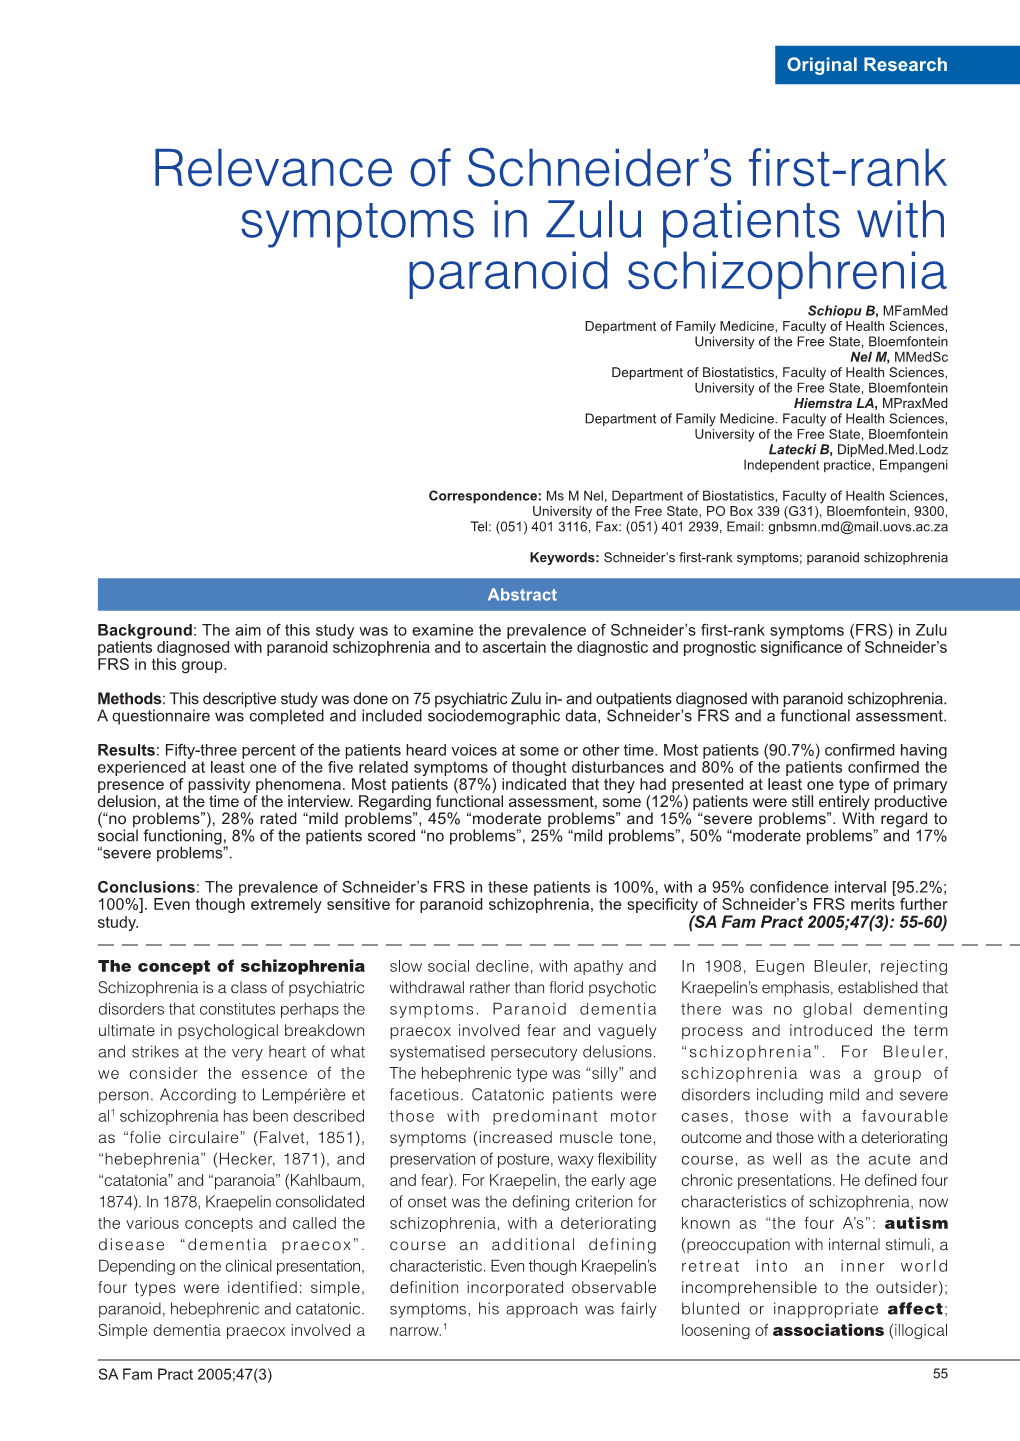 Relevance of Schneider's First-Rank Symptoms in Zulu Patients With